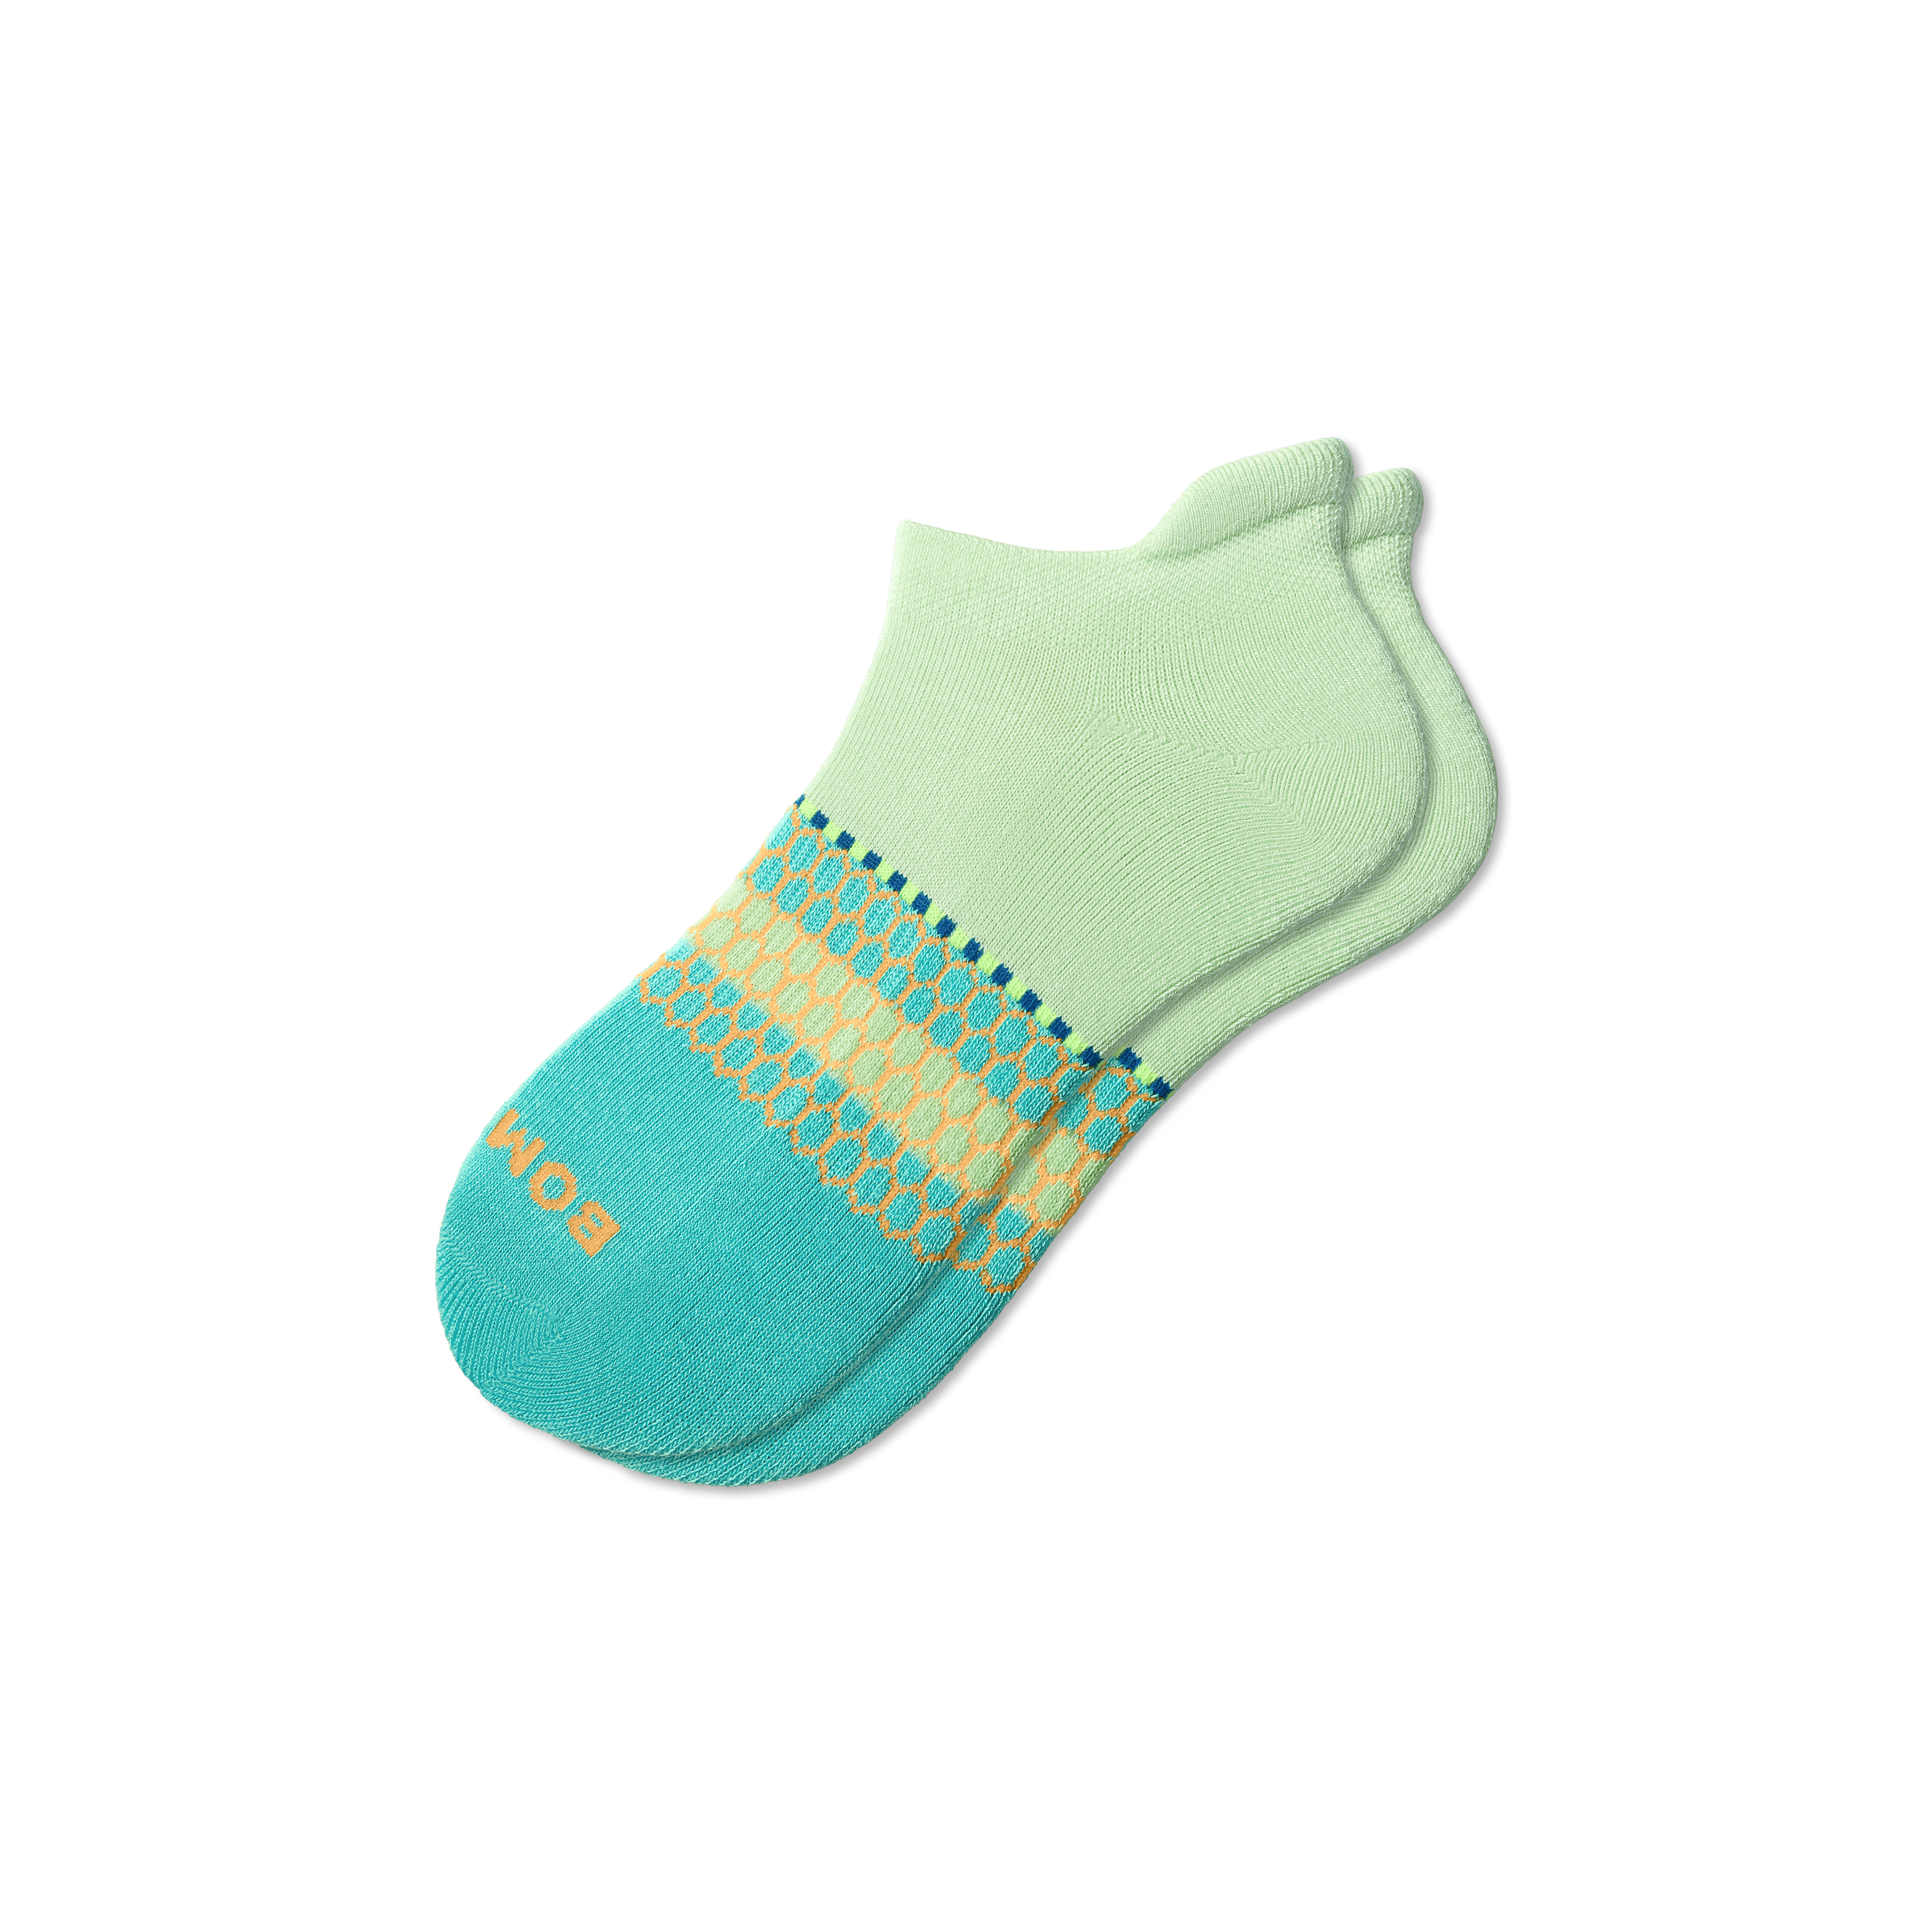 Bombas Black Hive Collection Ankle Socks In Aqua Mint